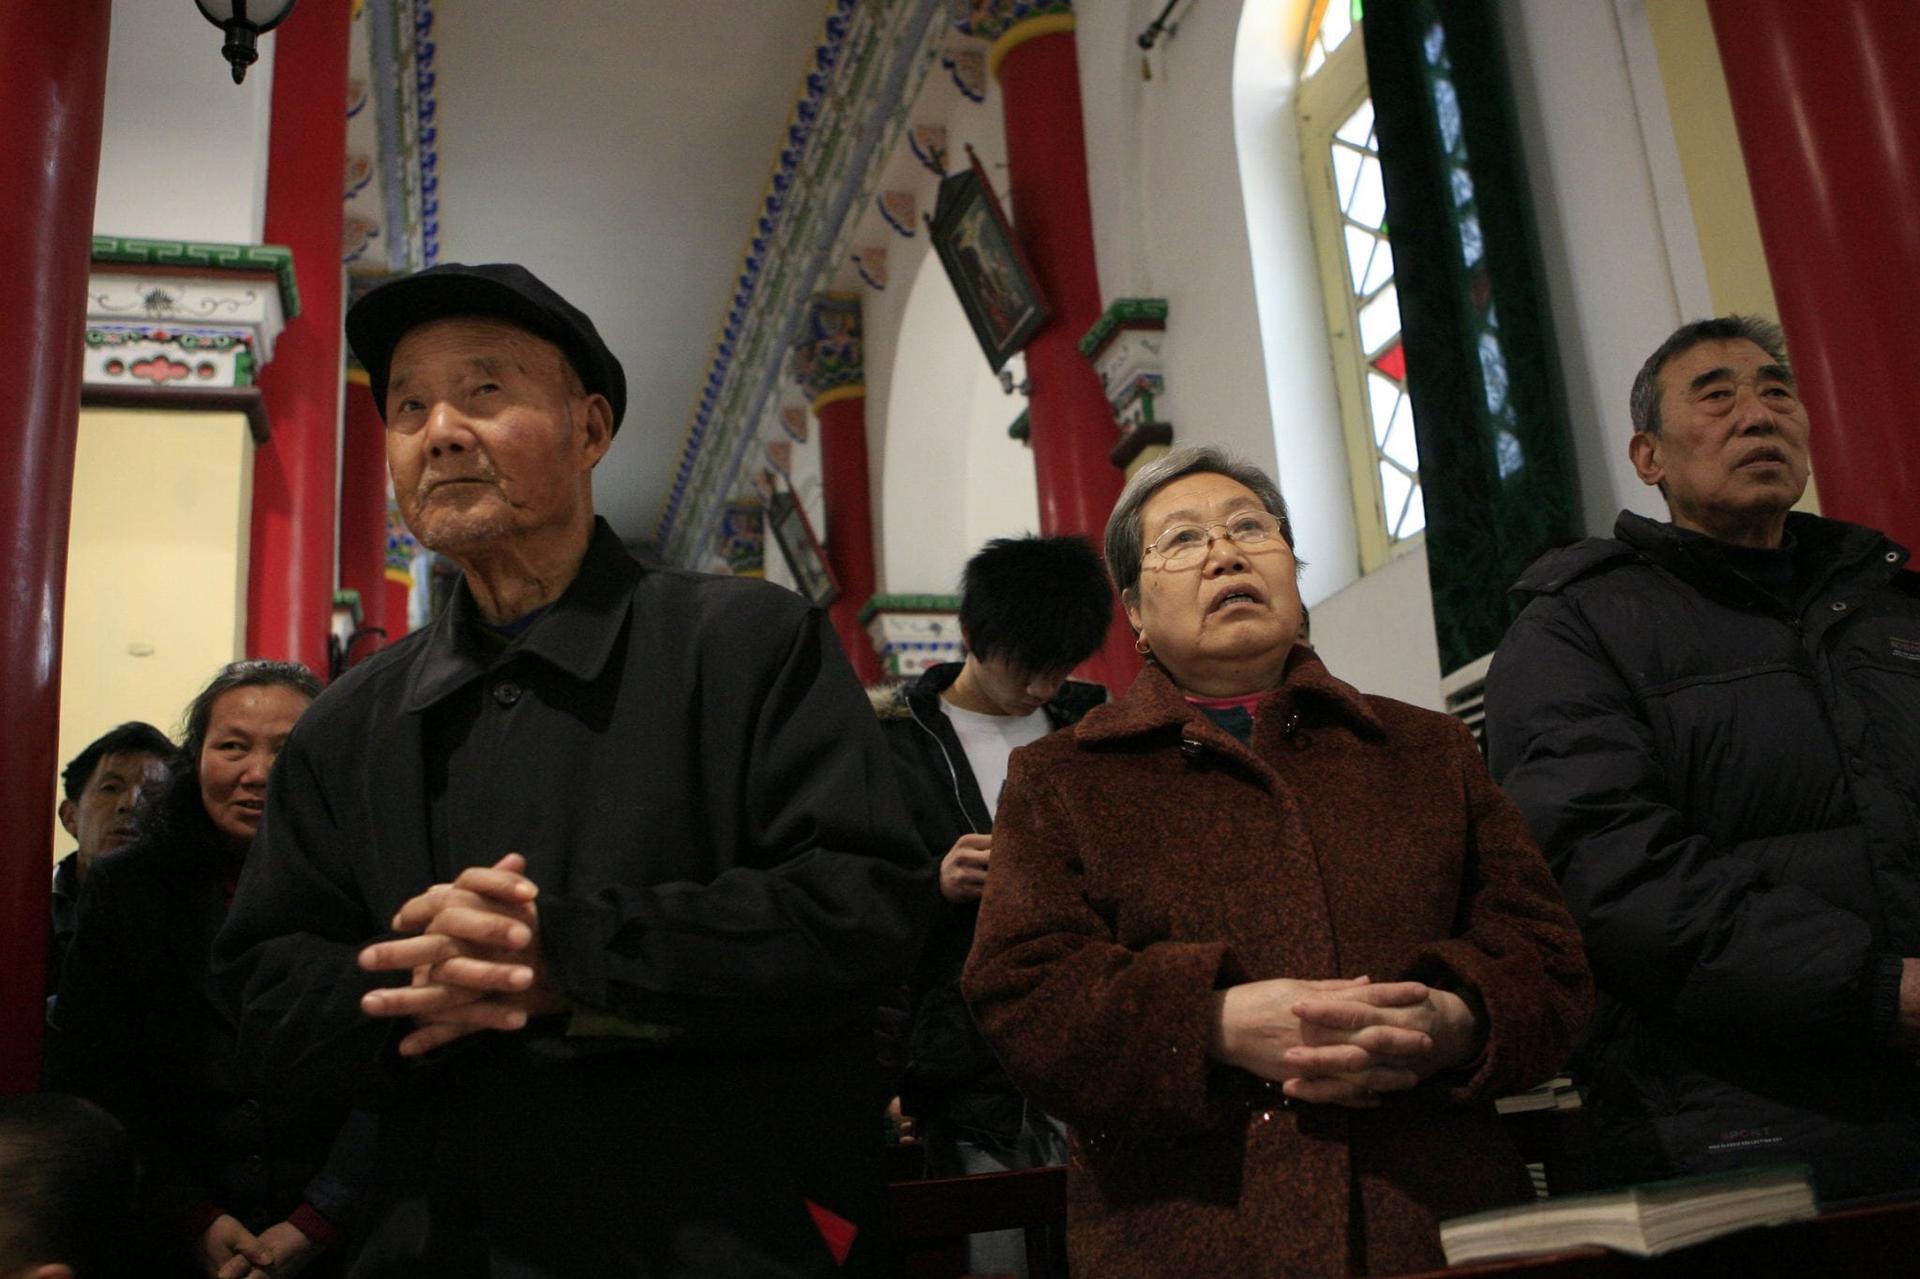 Vatican calls on China to let bishop exercise his ministry